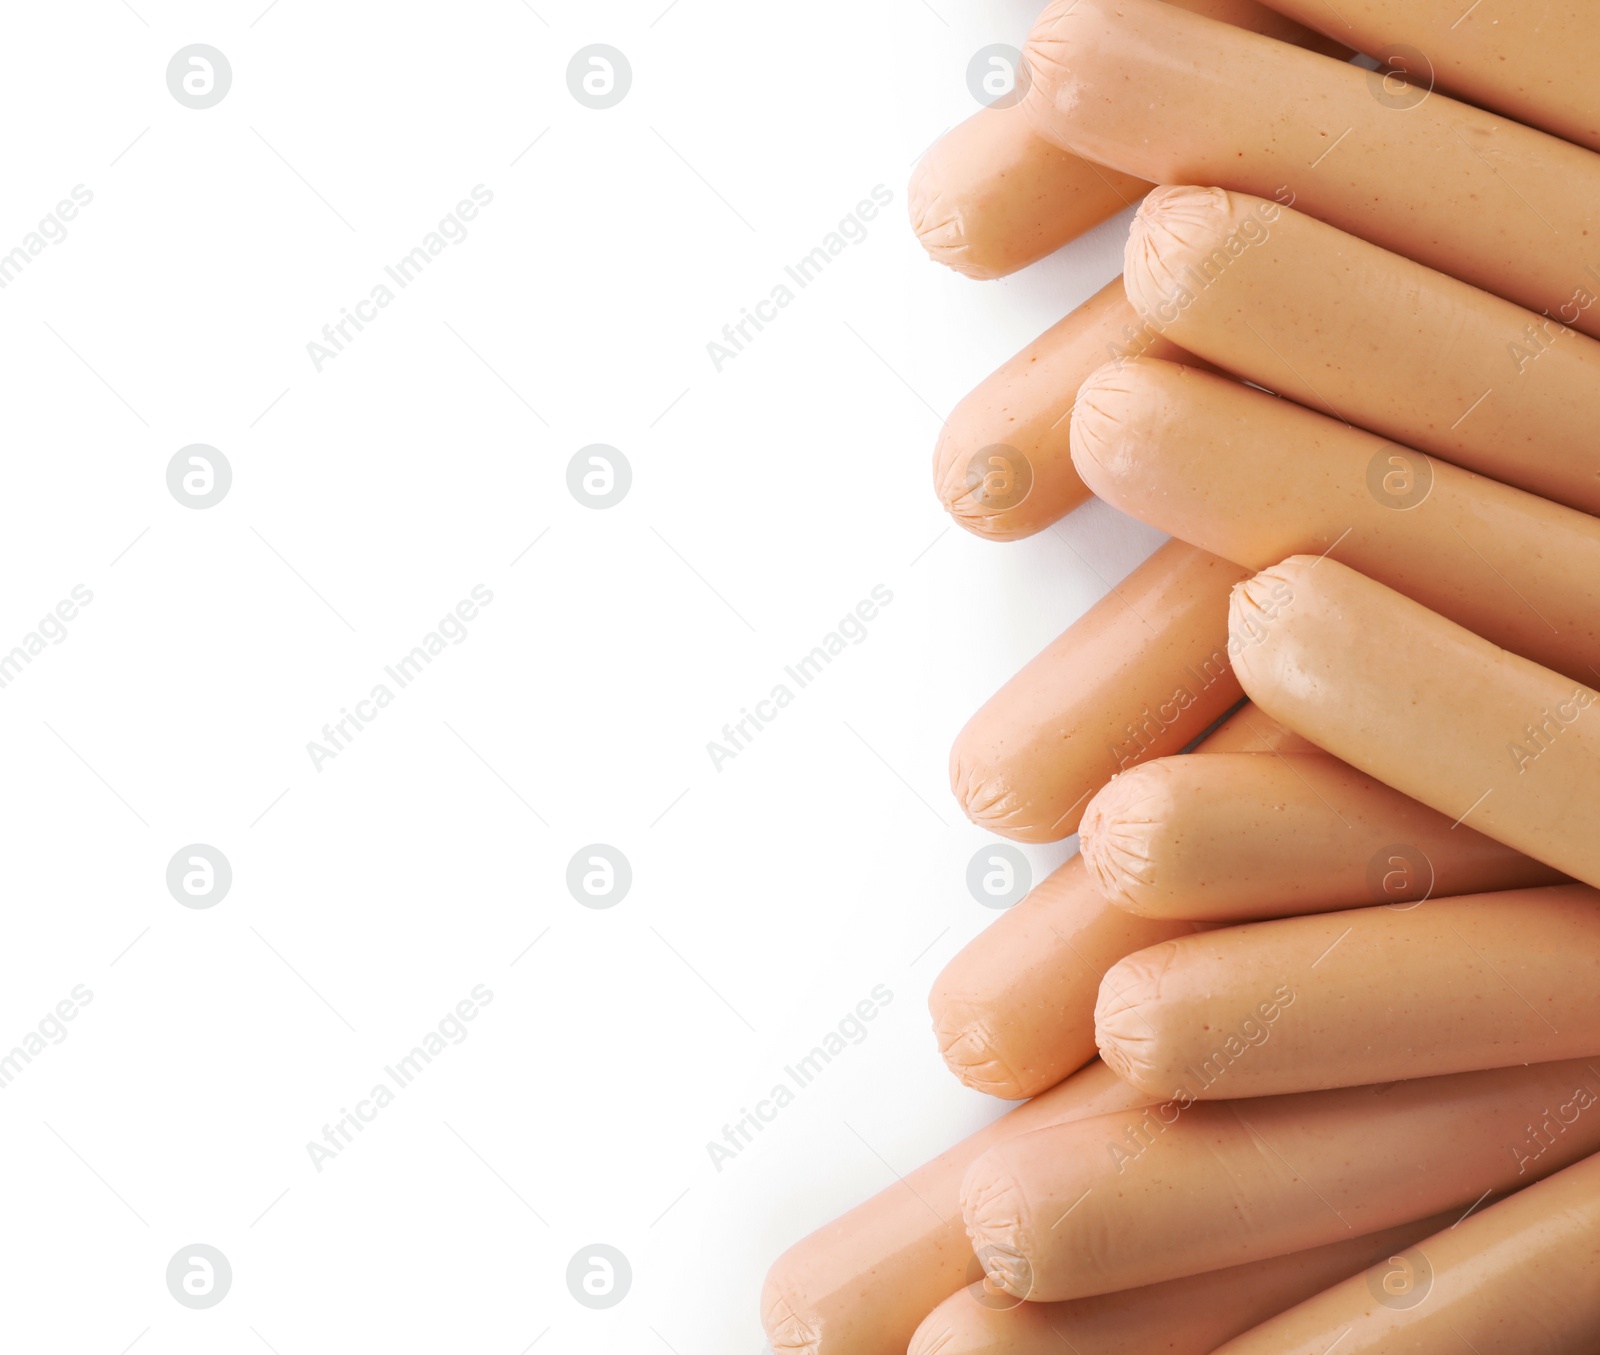 Photo of Tasty sausages on white background, top view with space for text. Meat product